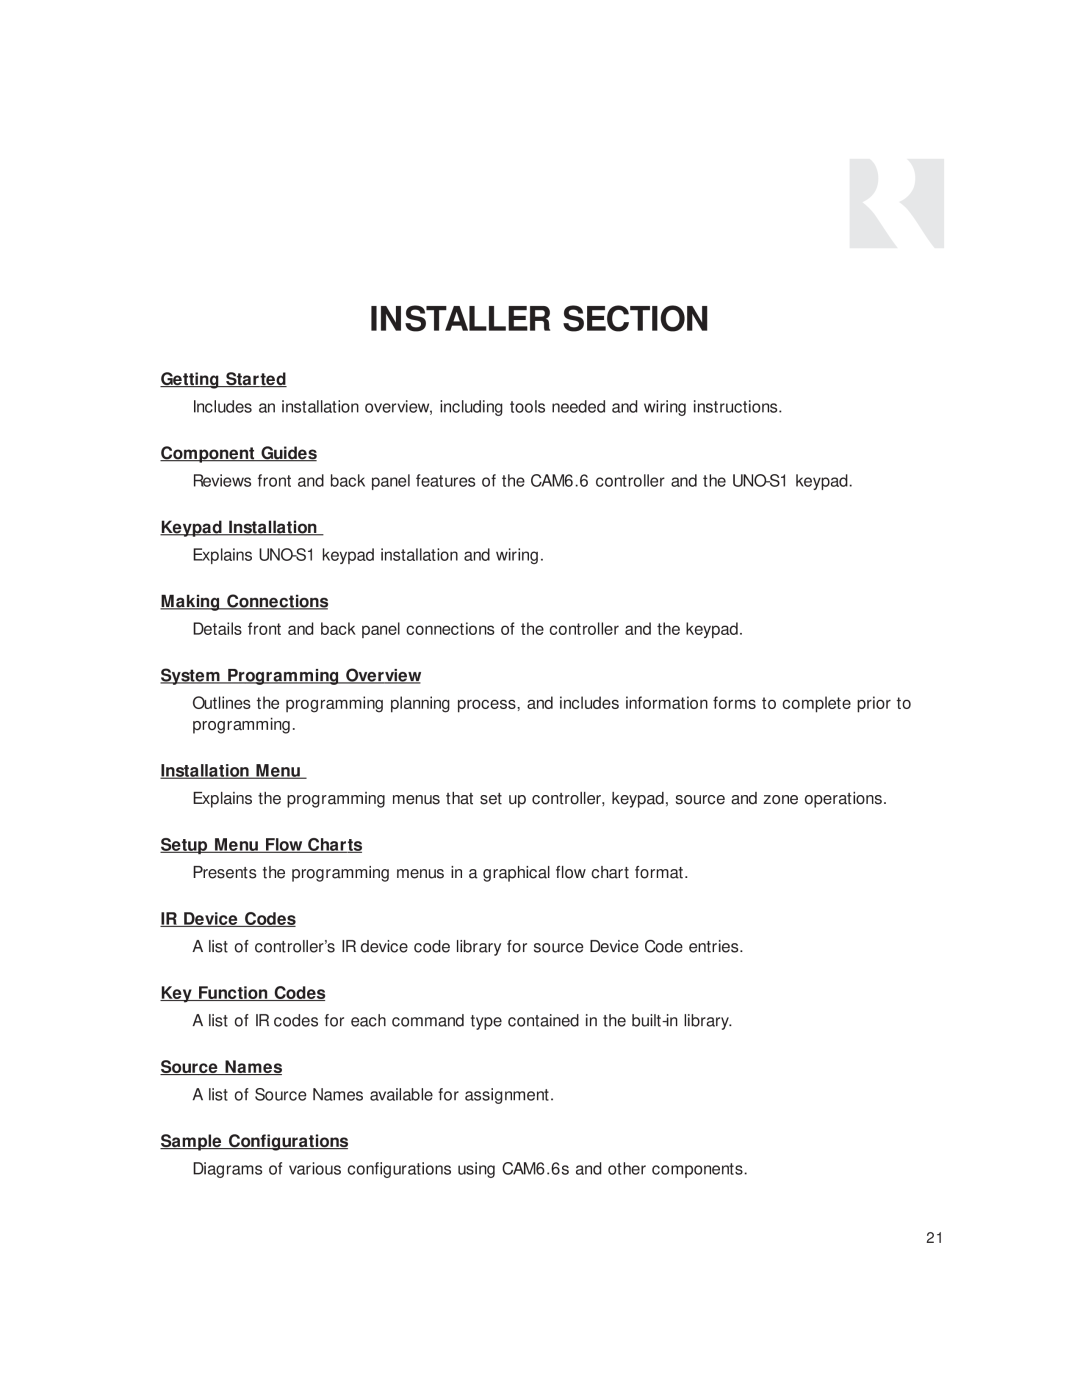 Russound CAM6.6T-S1 instruction manual Installer Section 